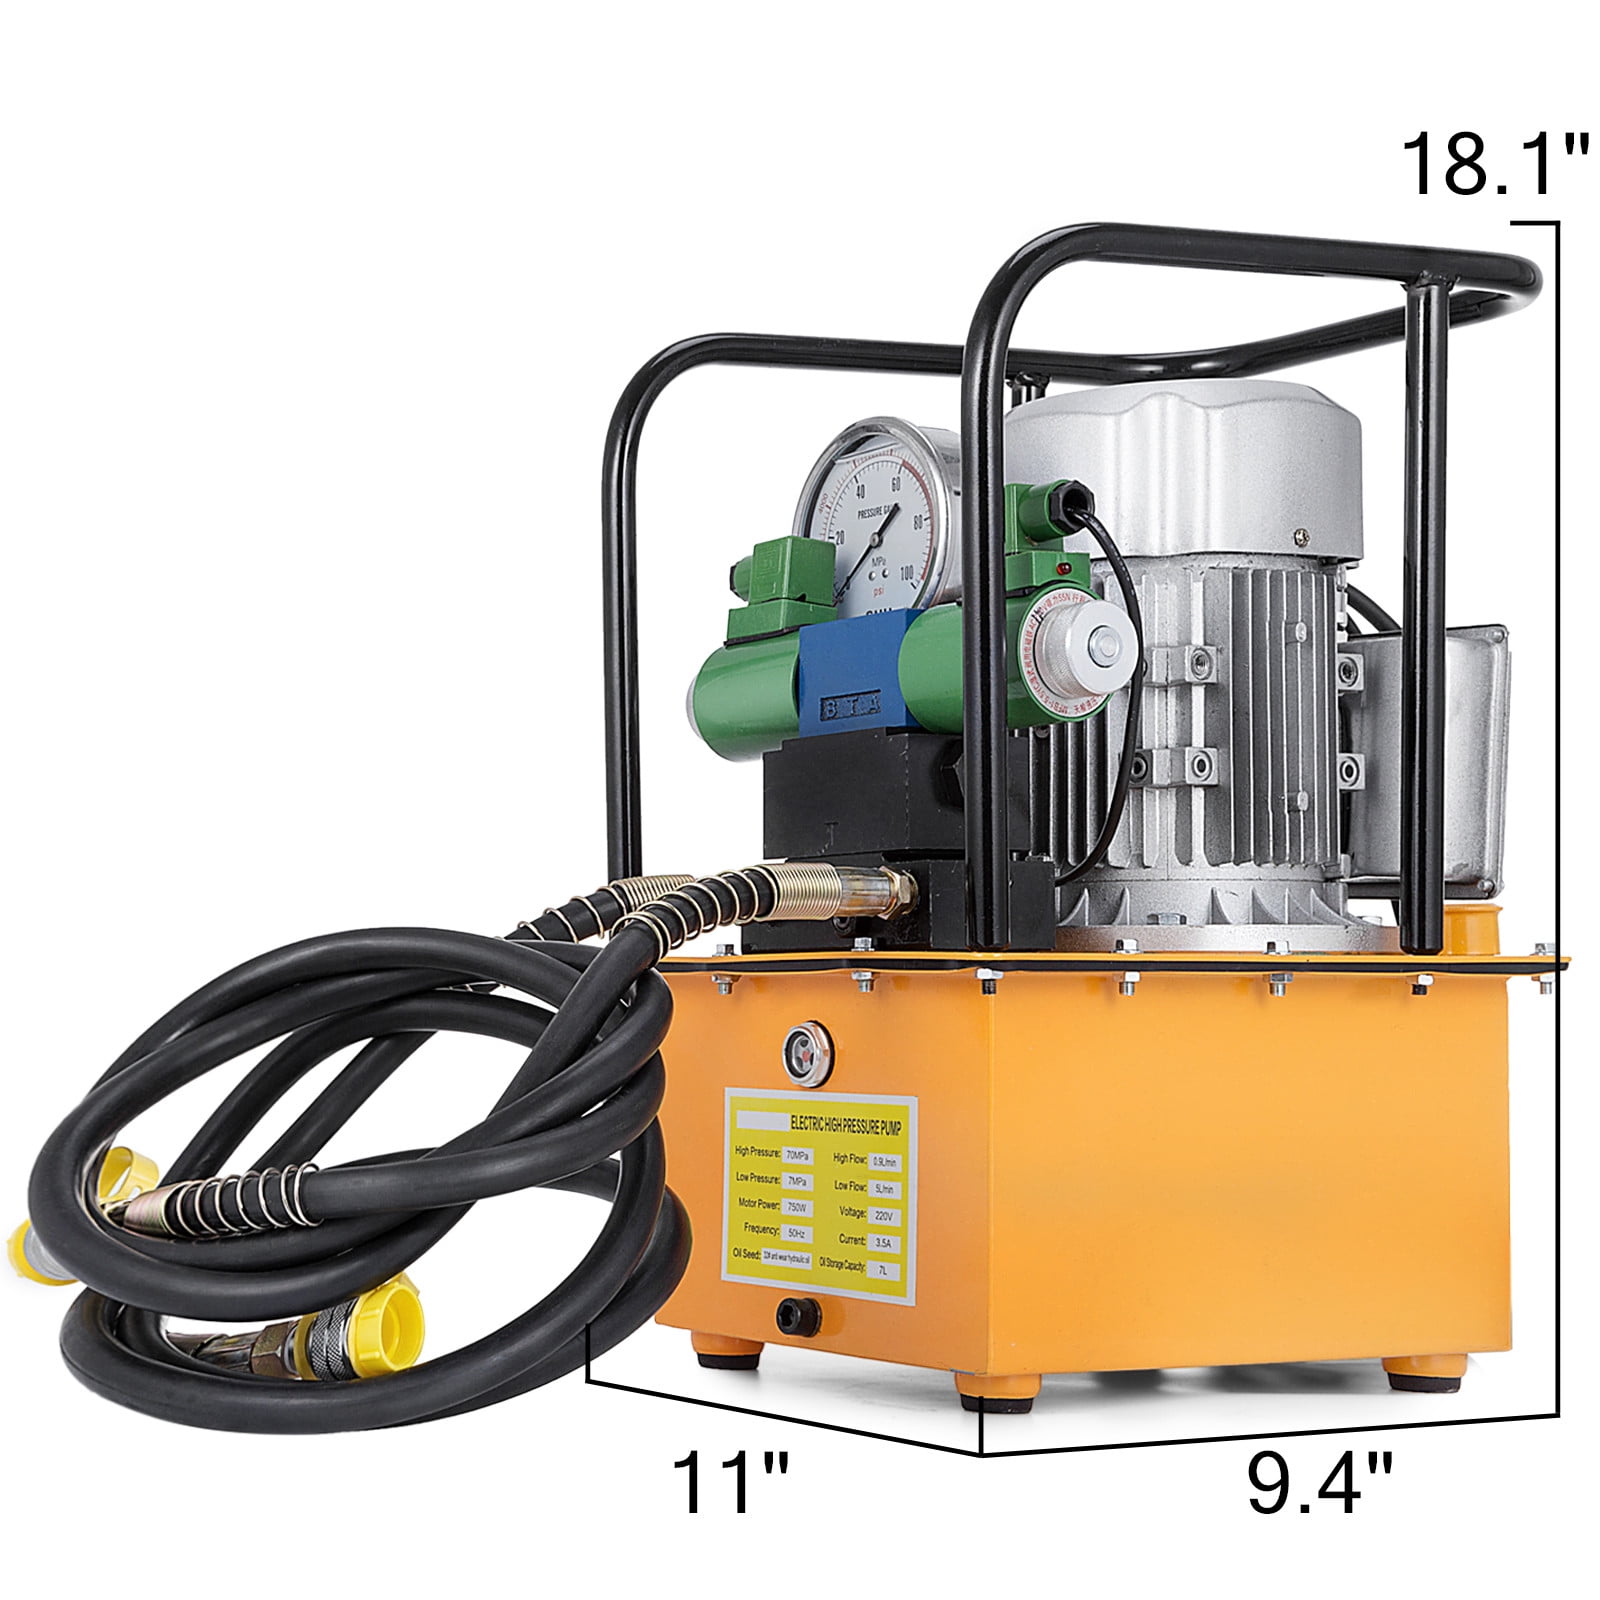 MosaicAL Electric Hydraulic Pump 10000 PSI Double Acting Driven Hydraulic Pump Manual Valve Electric Driven Hydraulic Pump with Solenoid Valve Oil Pressure Pump Double Acting 